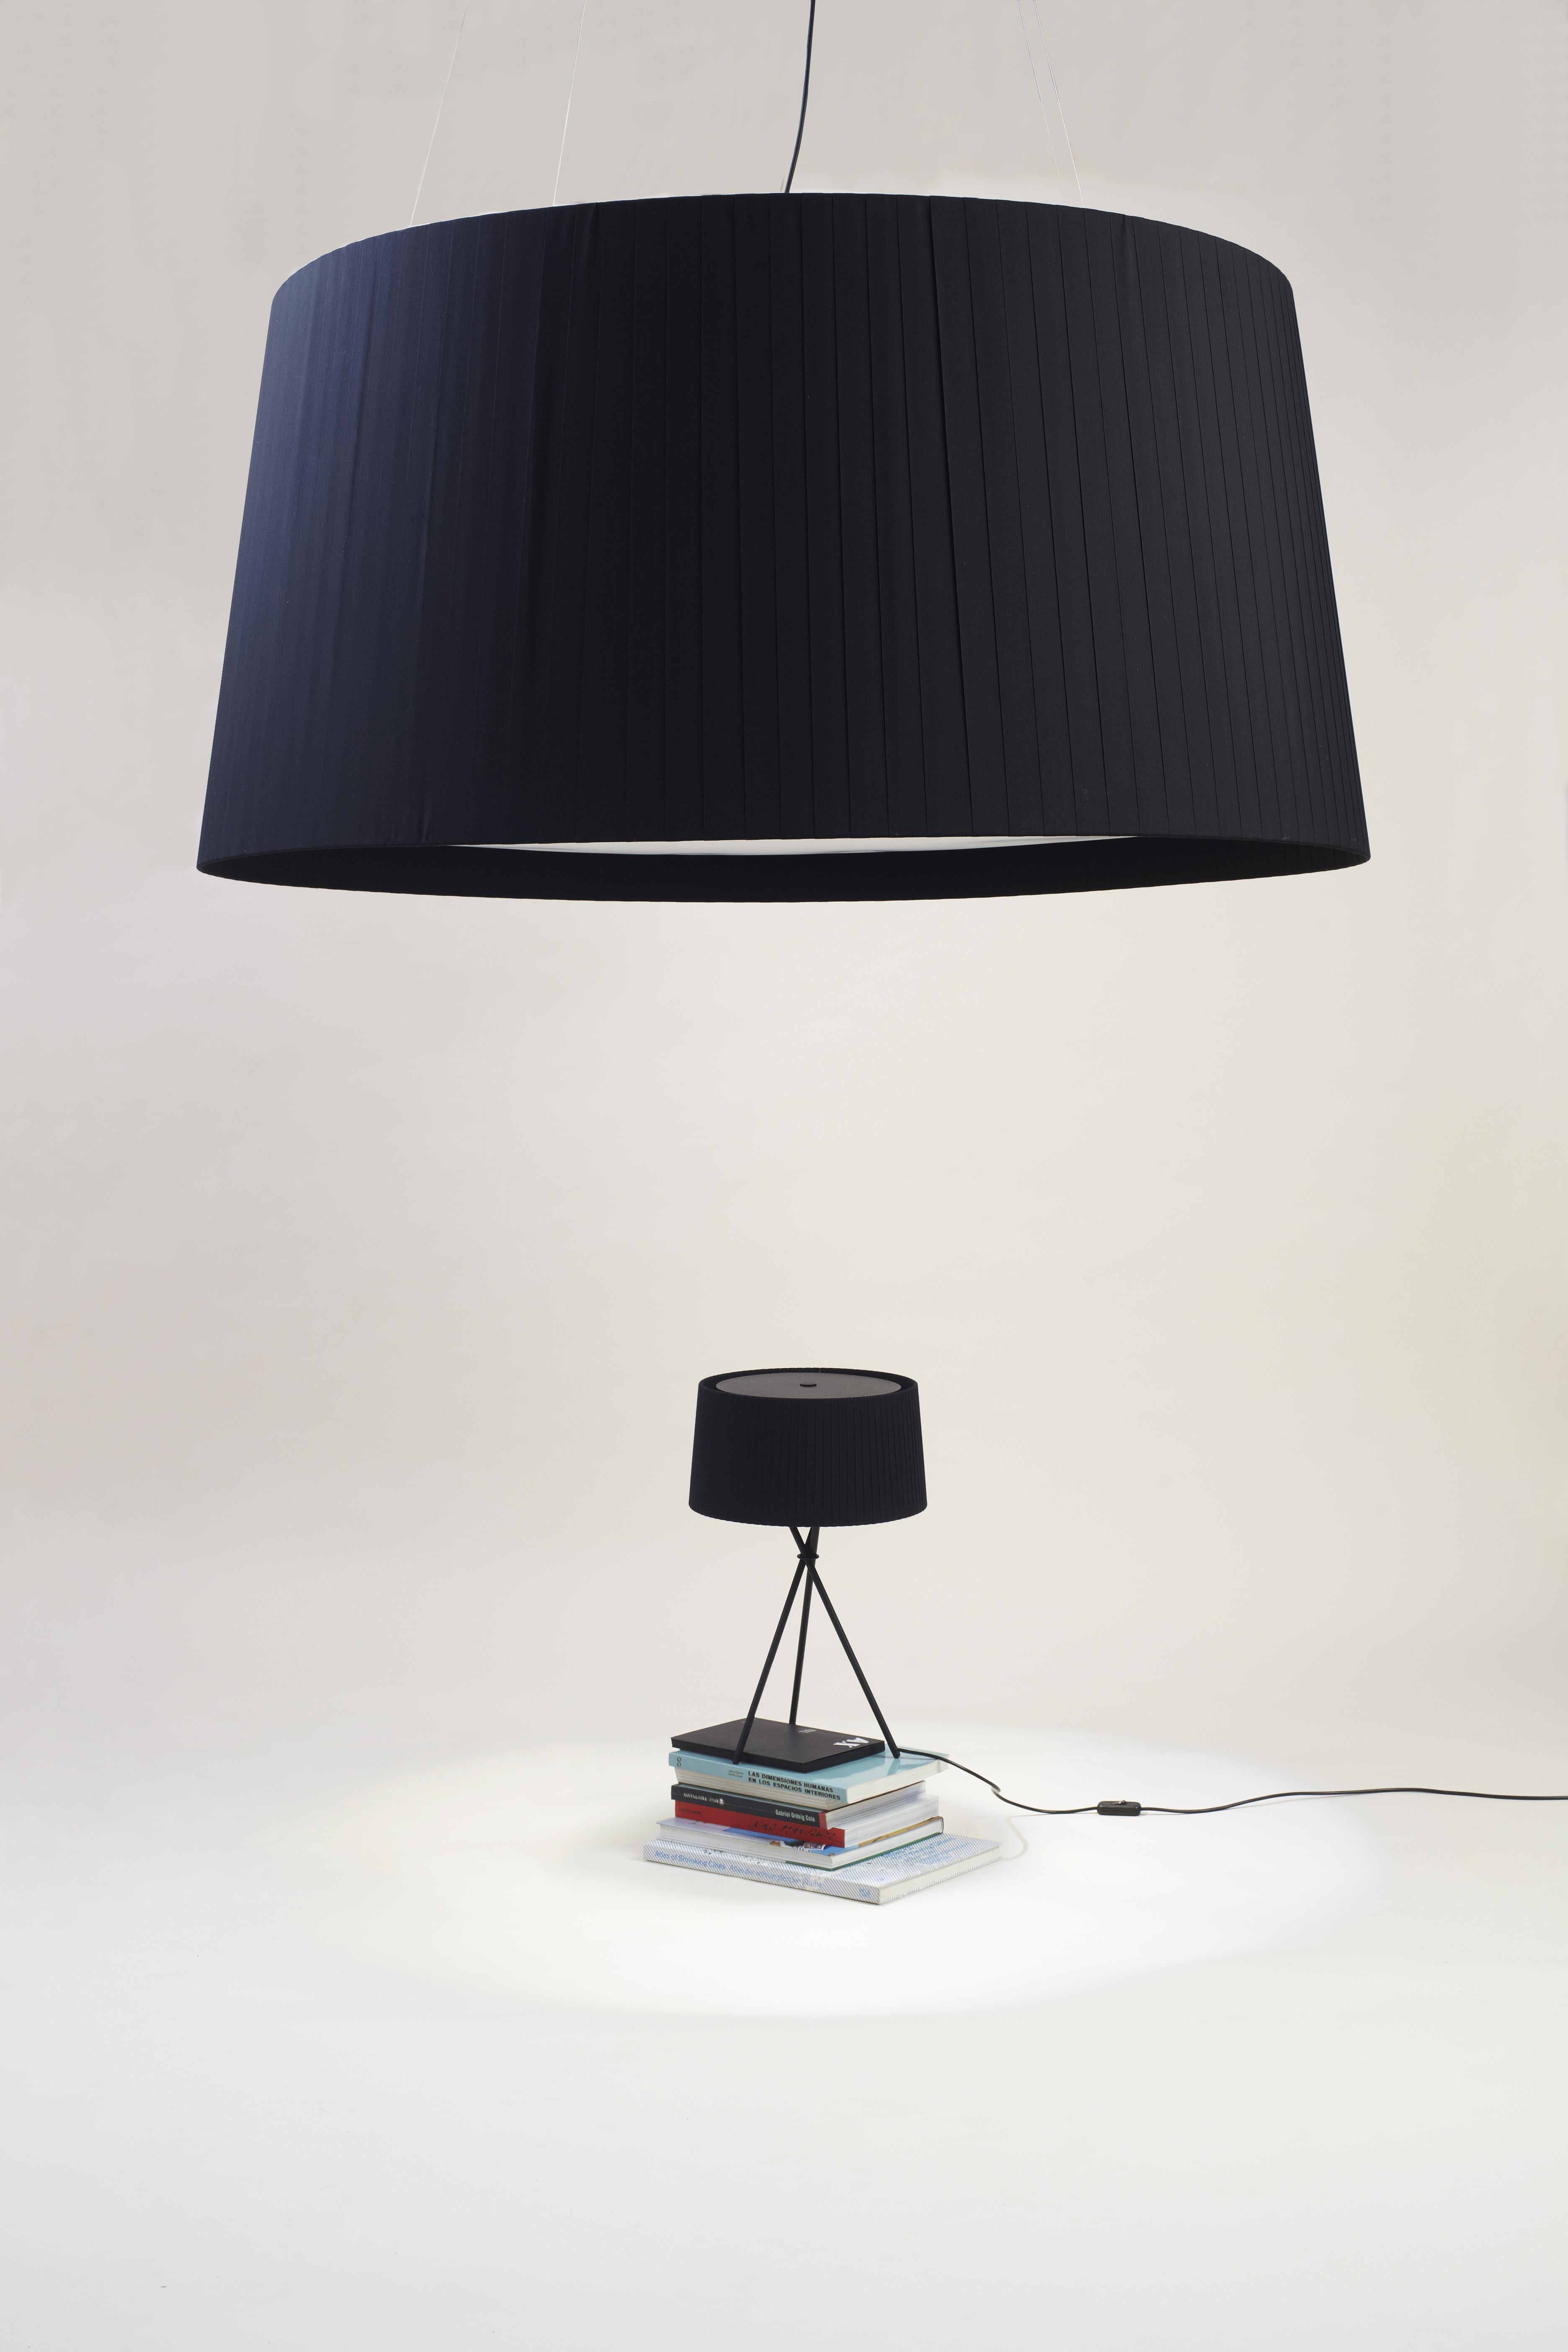 Mustard Trípode M3 Table Lamp by Santa & Cole For Sale 3